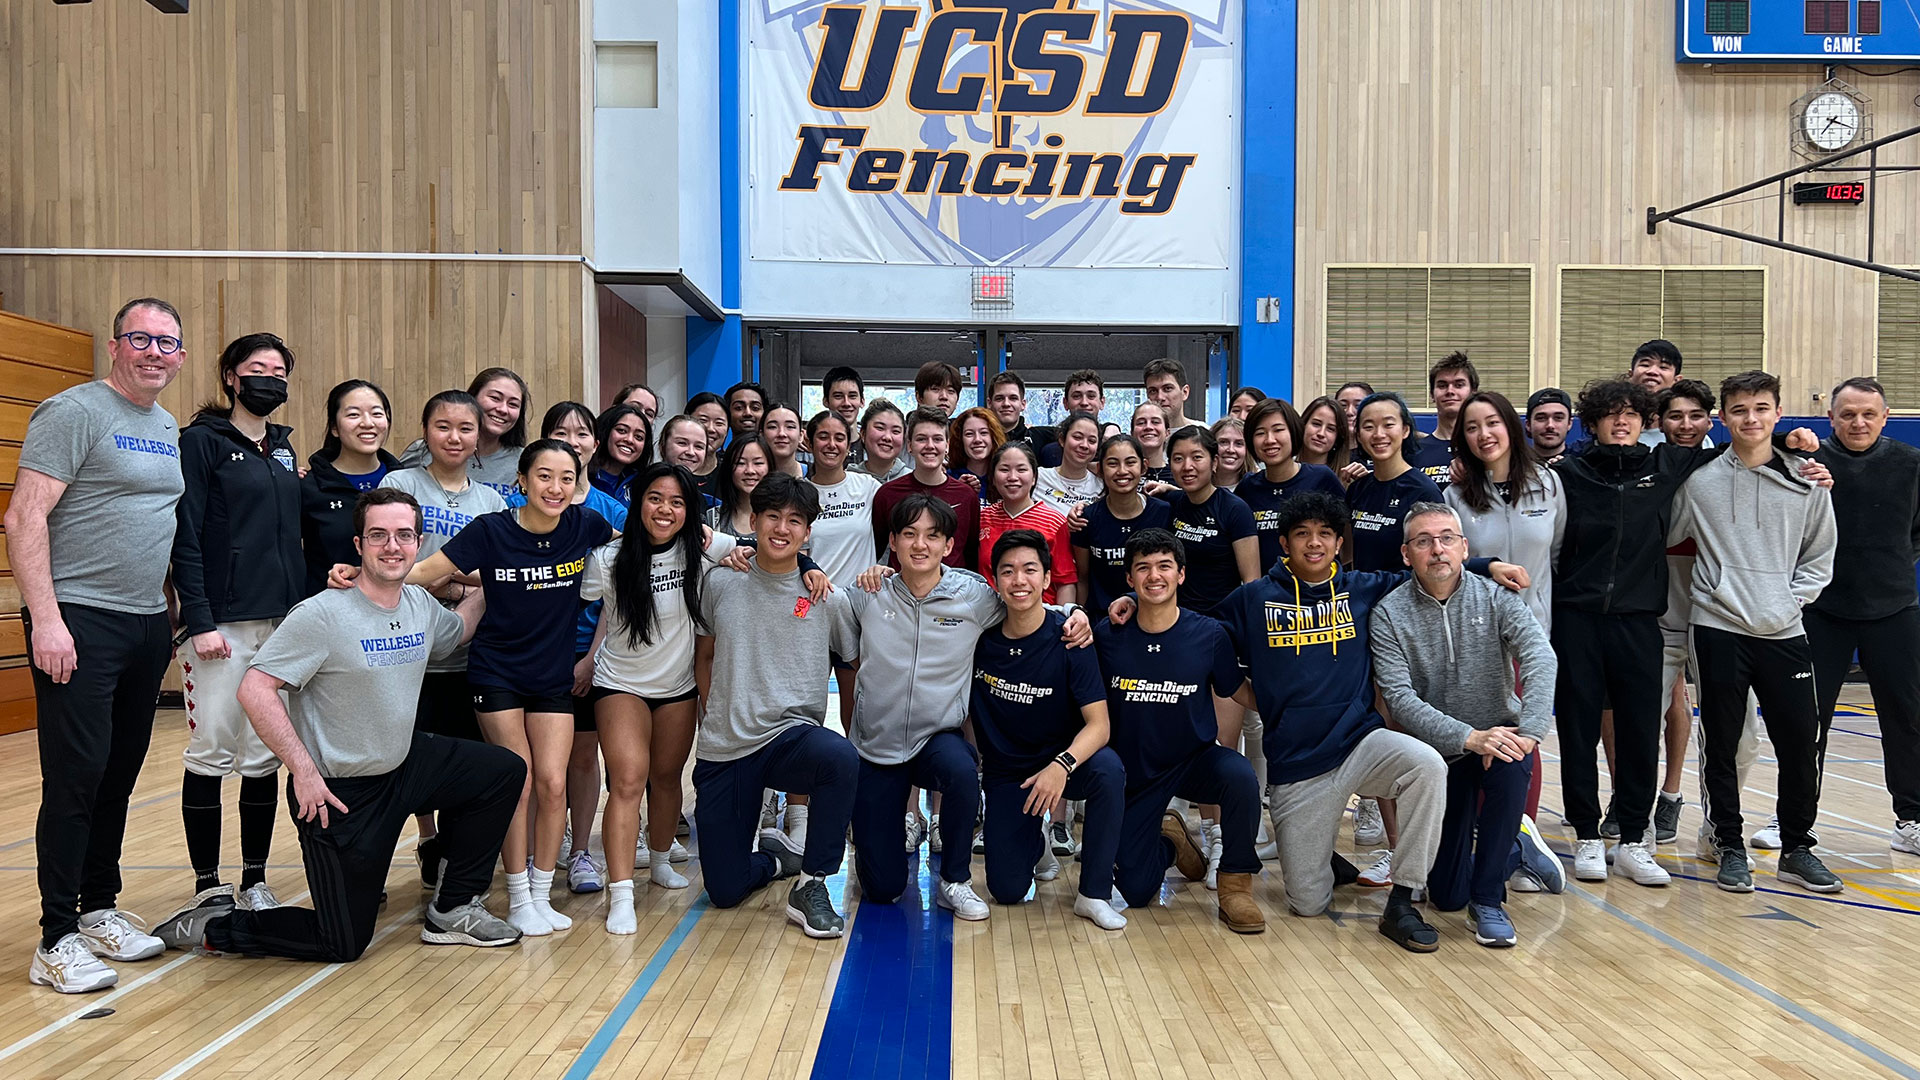 Wellesley fencing visited the West Coast for two rounds of fencing with UCSD